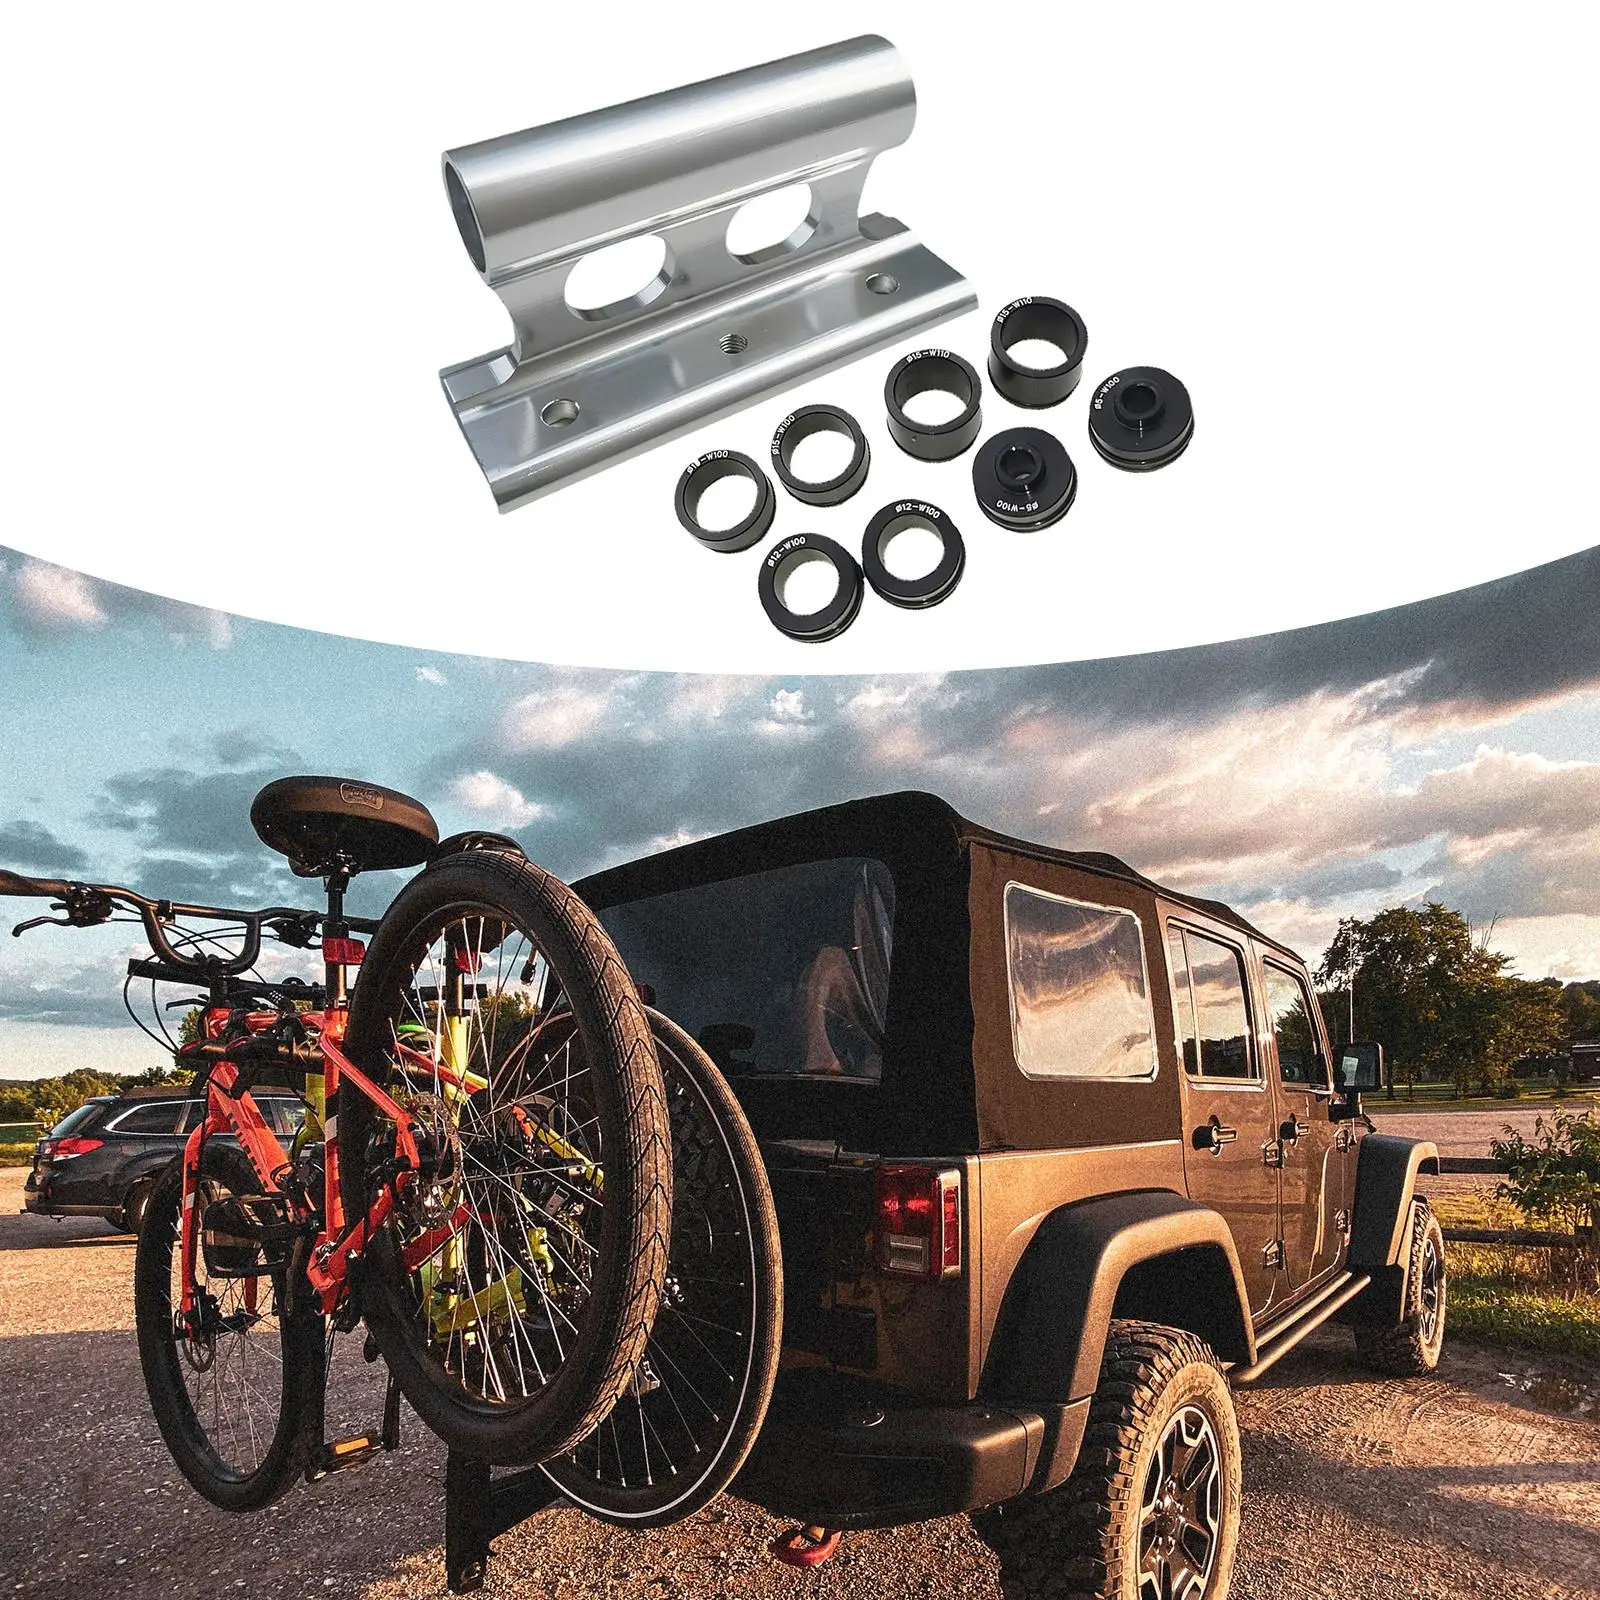 Road Bike Car Roof Mount Rack Bicycle Storage Front Fork Block Mount Rack Quick Release Thru Axle Carrier Holder Adapters